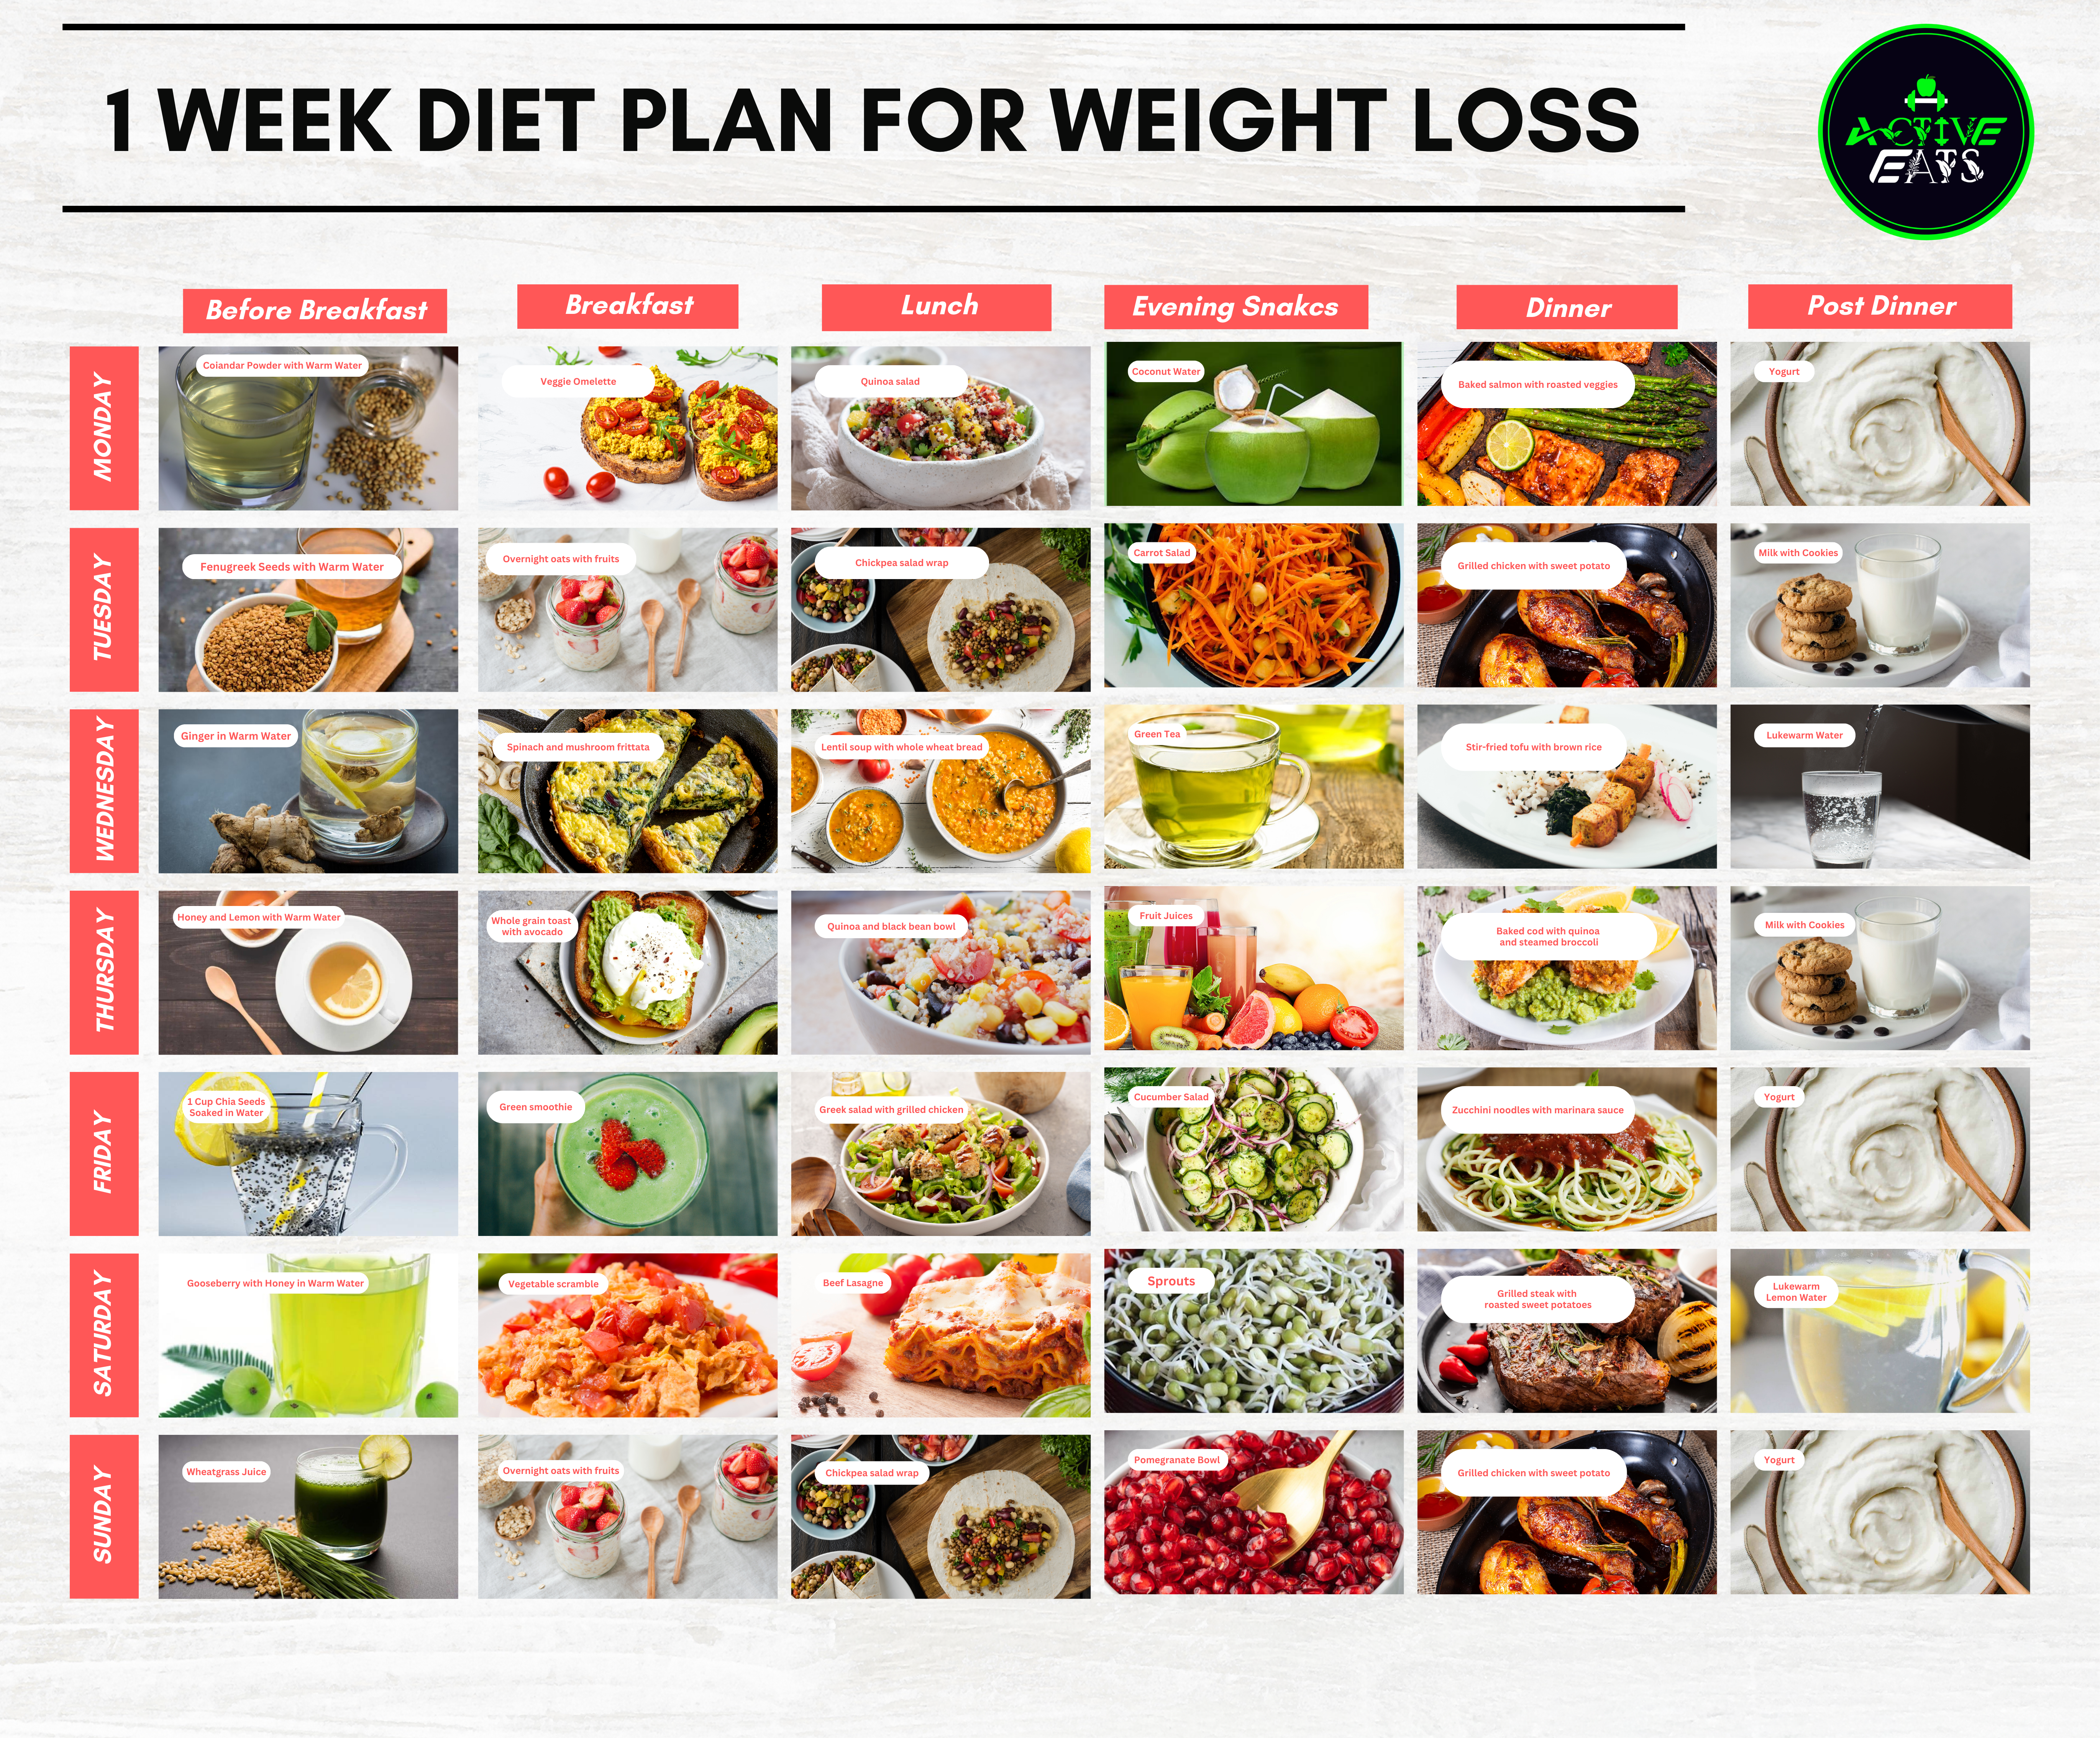 Image: A visual representation of a 1-week weight loss diet plan, featuring icons for a before breakfast drink, morning breakfast, lunch, evening snack, dinner, and post-dinner food choices.